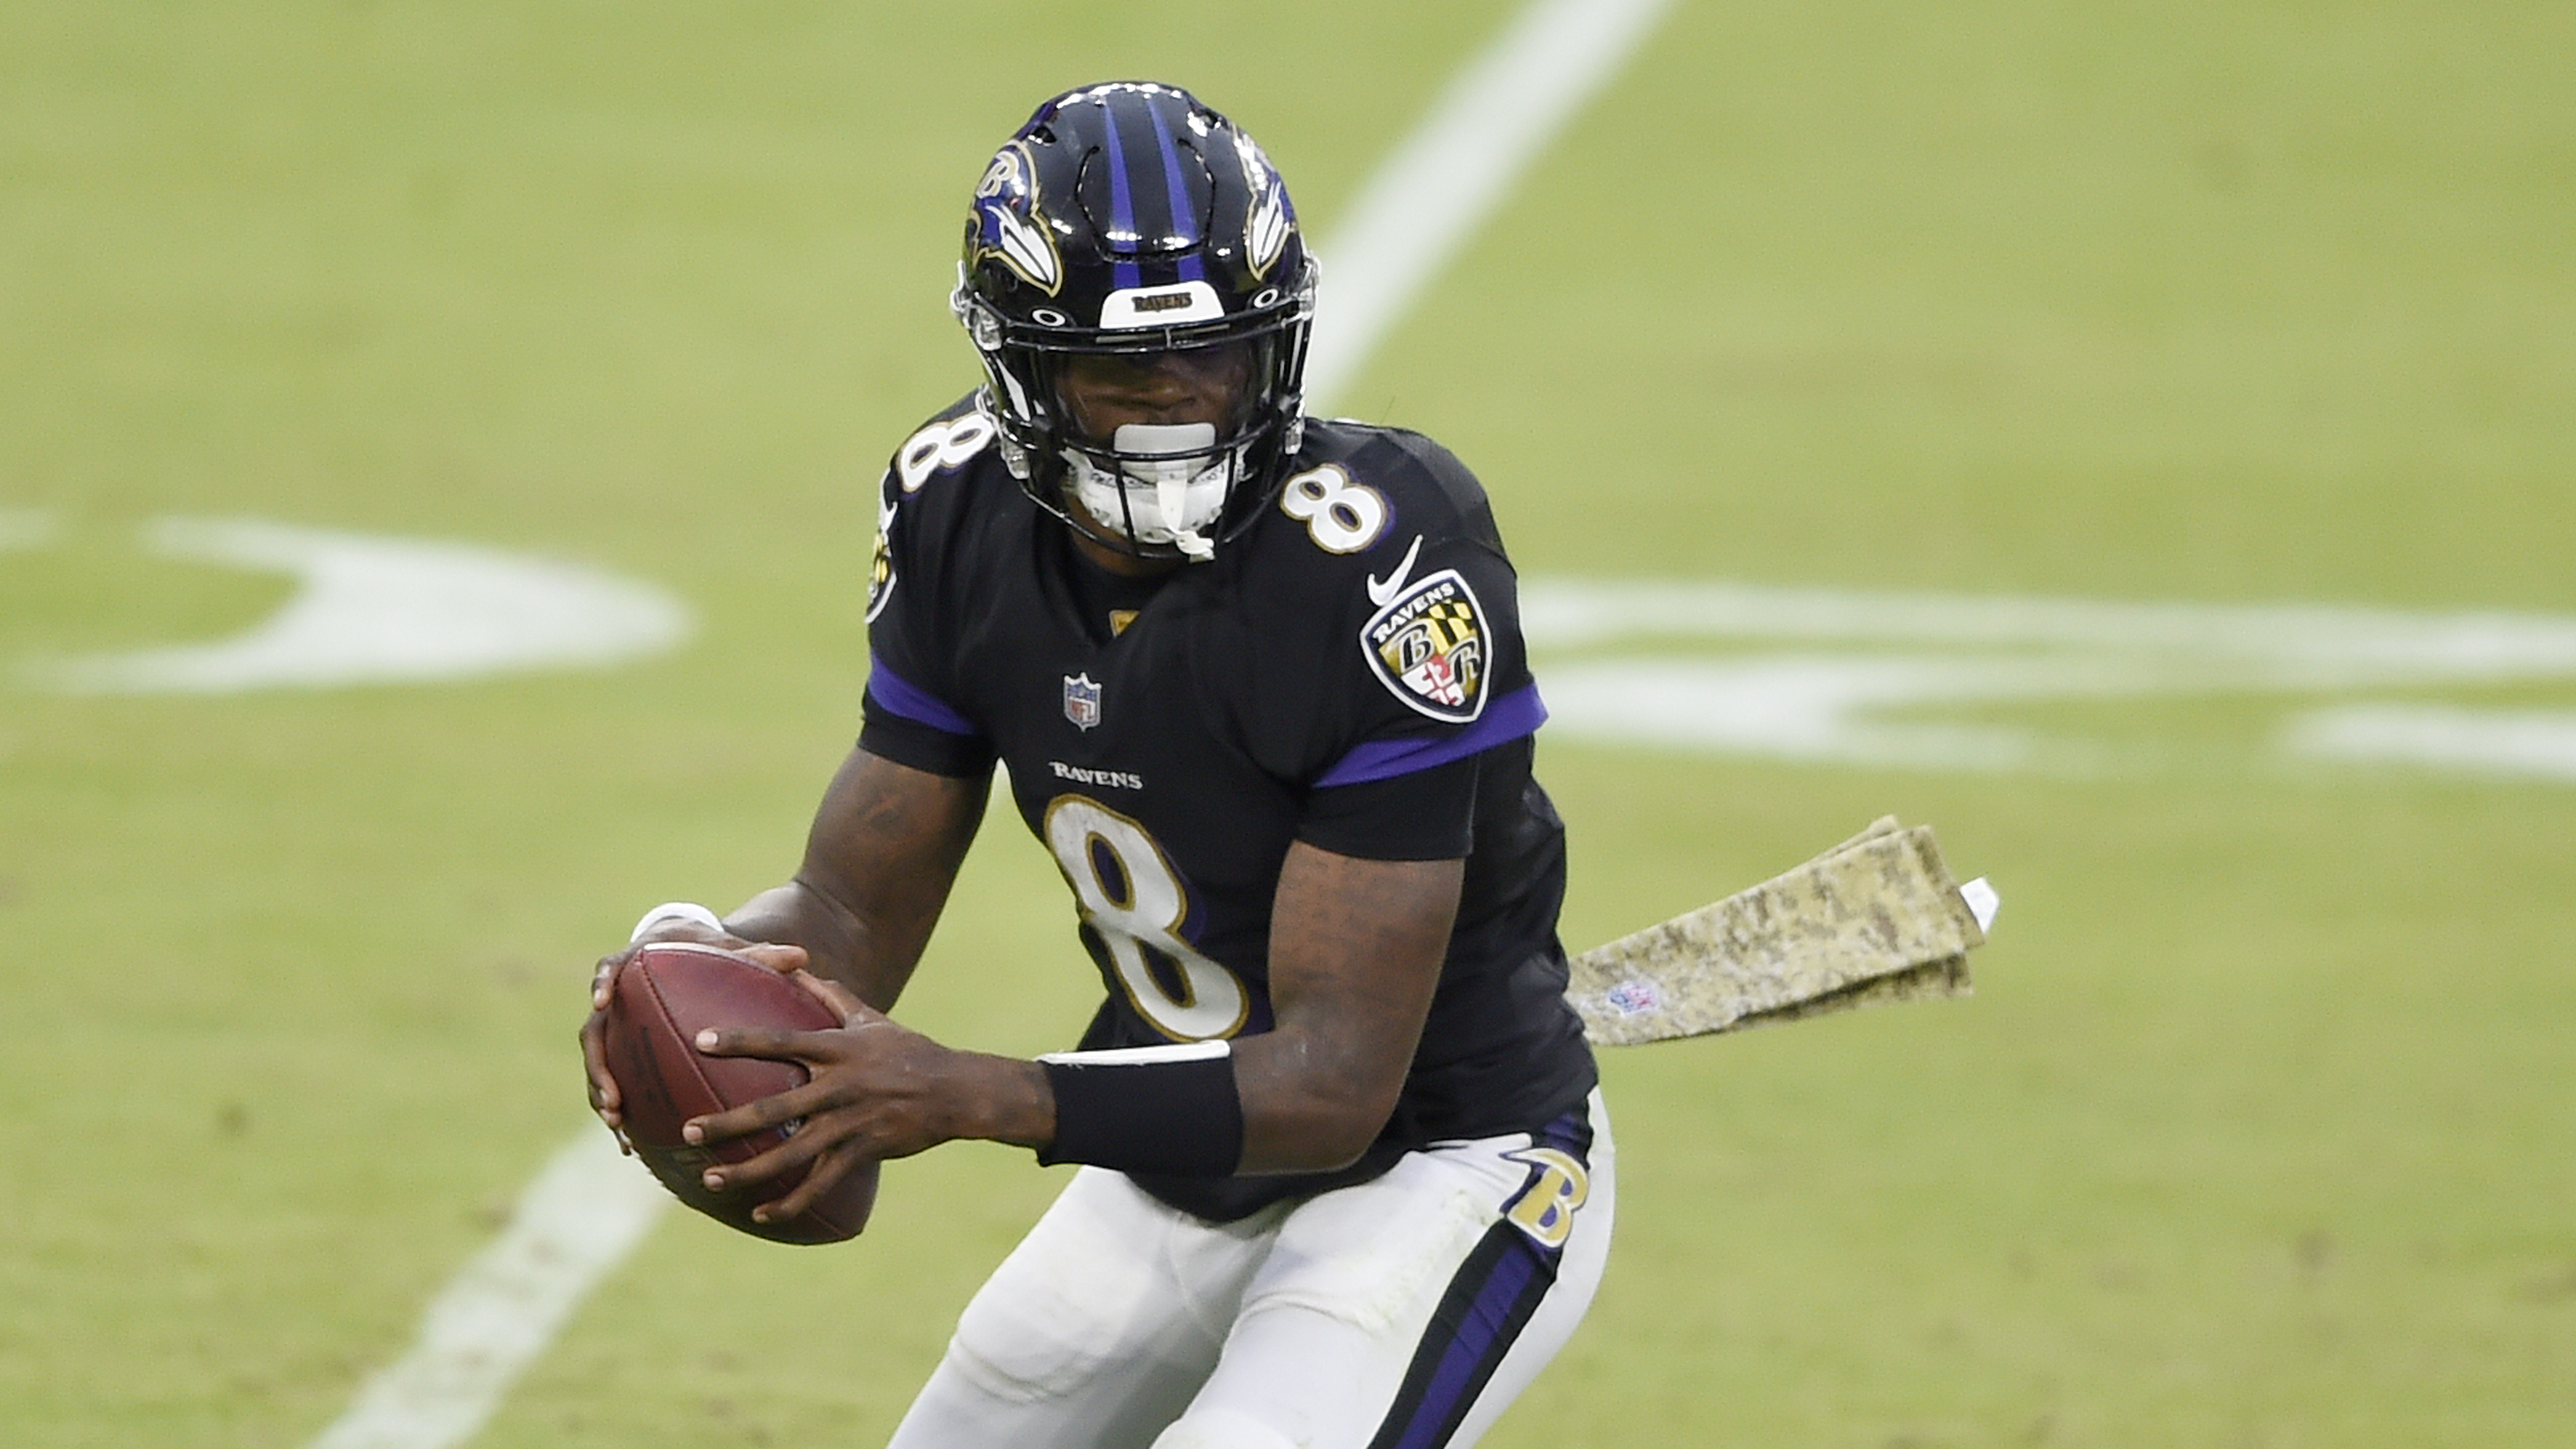 Ravens-Steelers Thanksgiving matchup postponed due to Covid-19